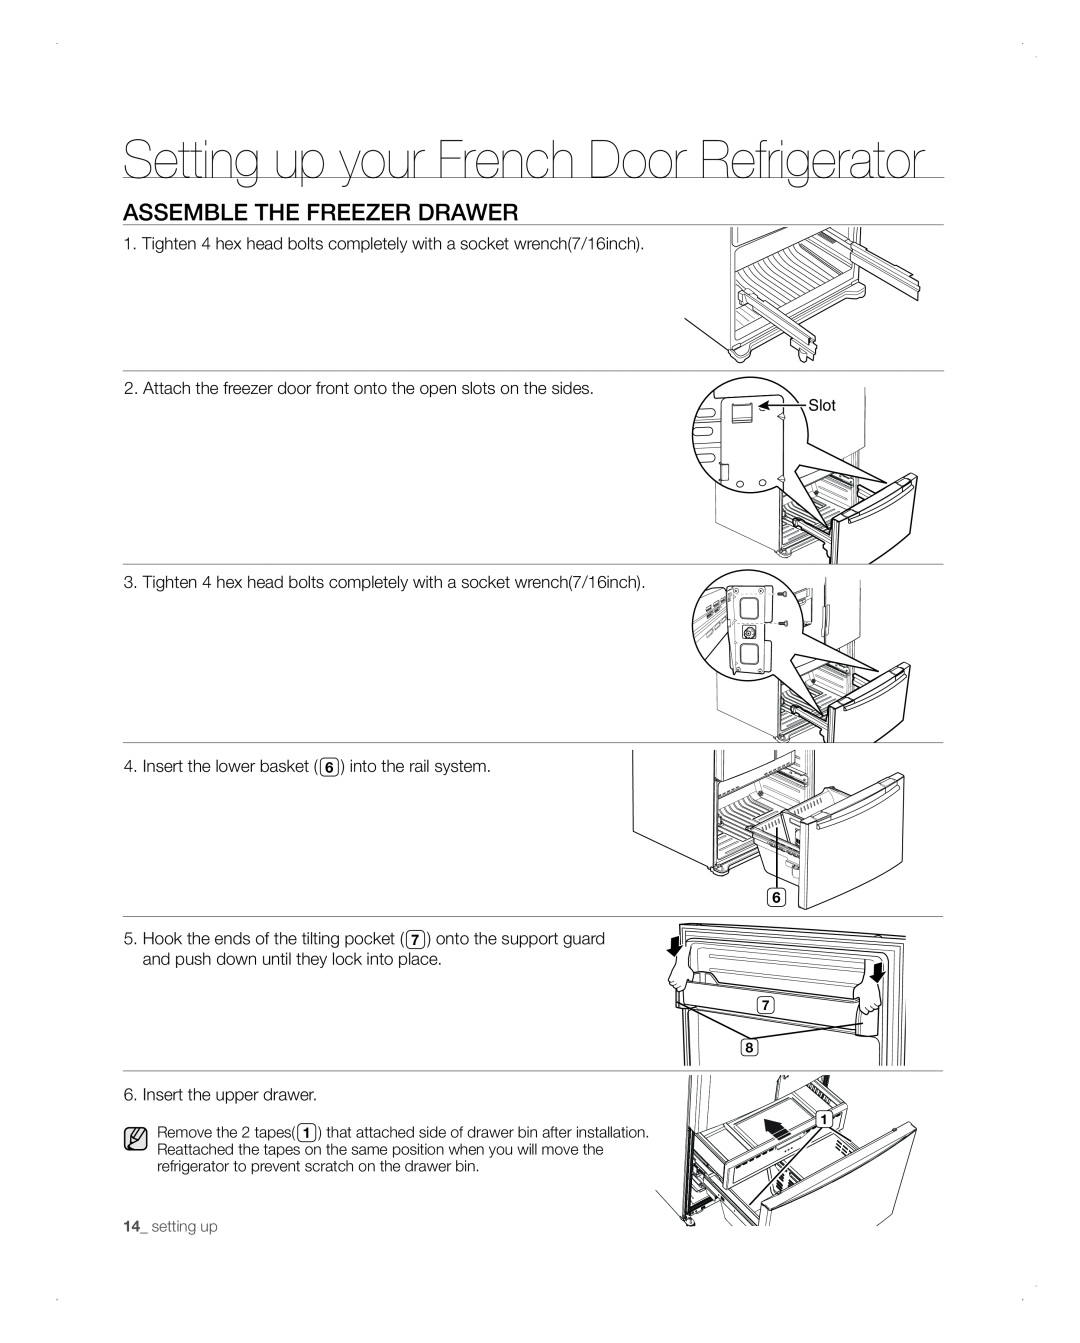 Samsung RFG298AARS user manual assemble the freezer drawer, Setting up your French Door Refrigerator 